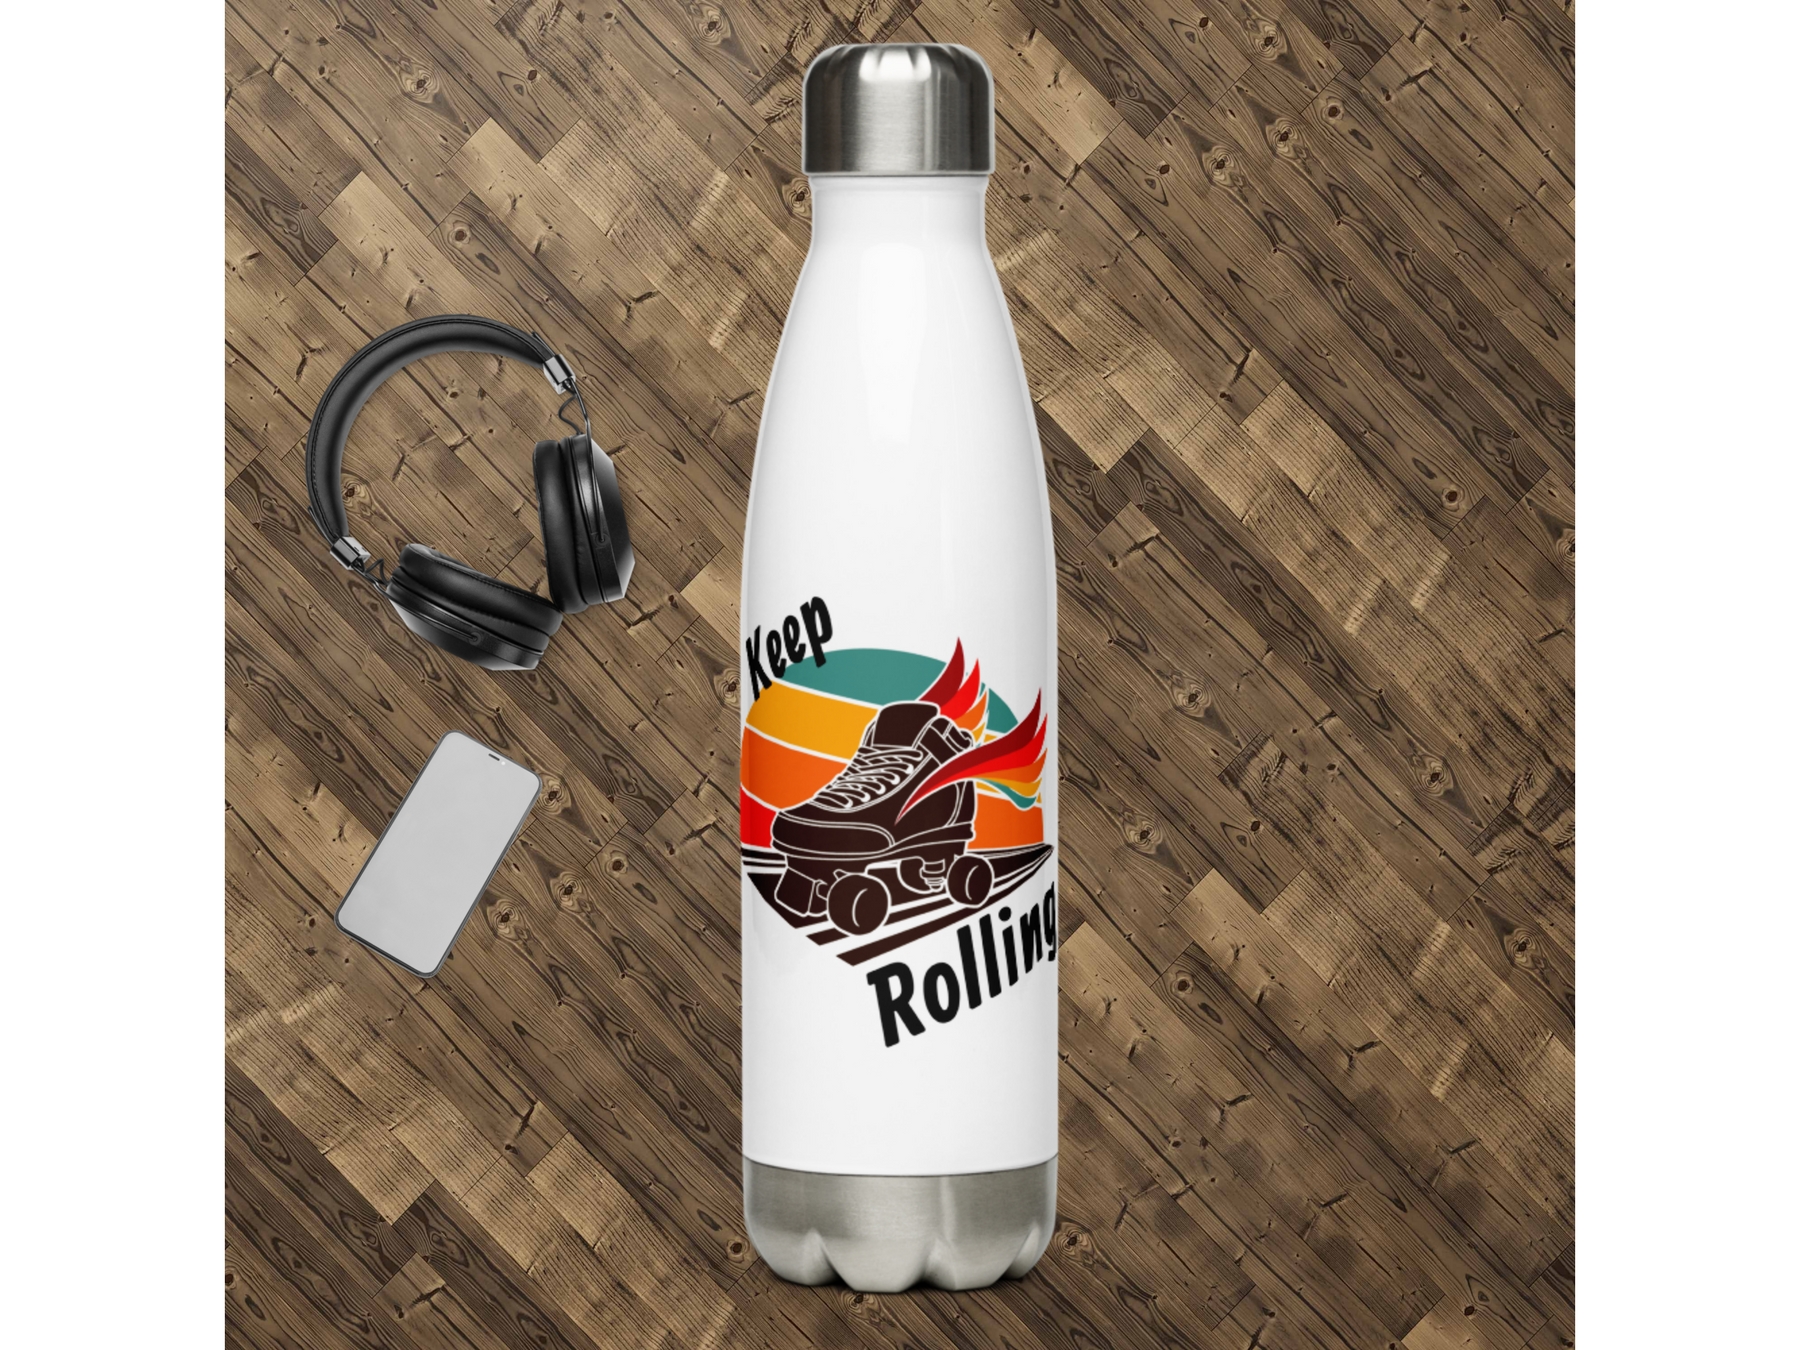 Stainless Steel Water Bottle, Accessories